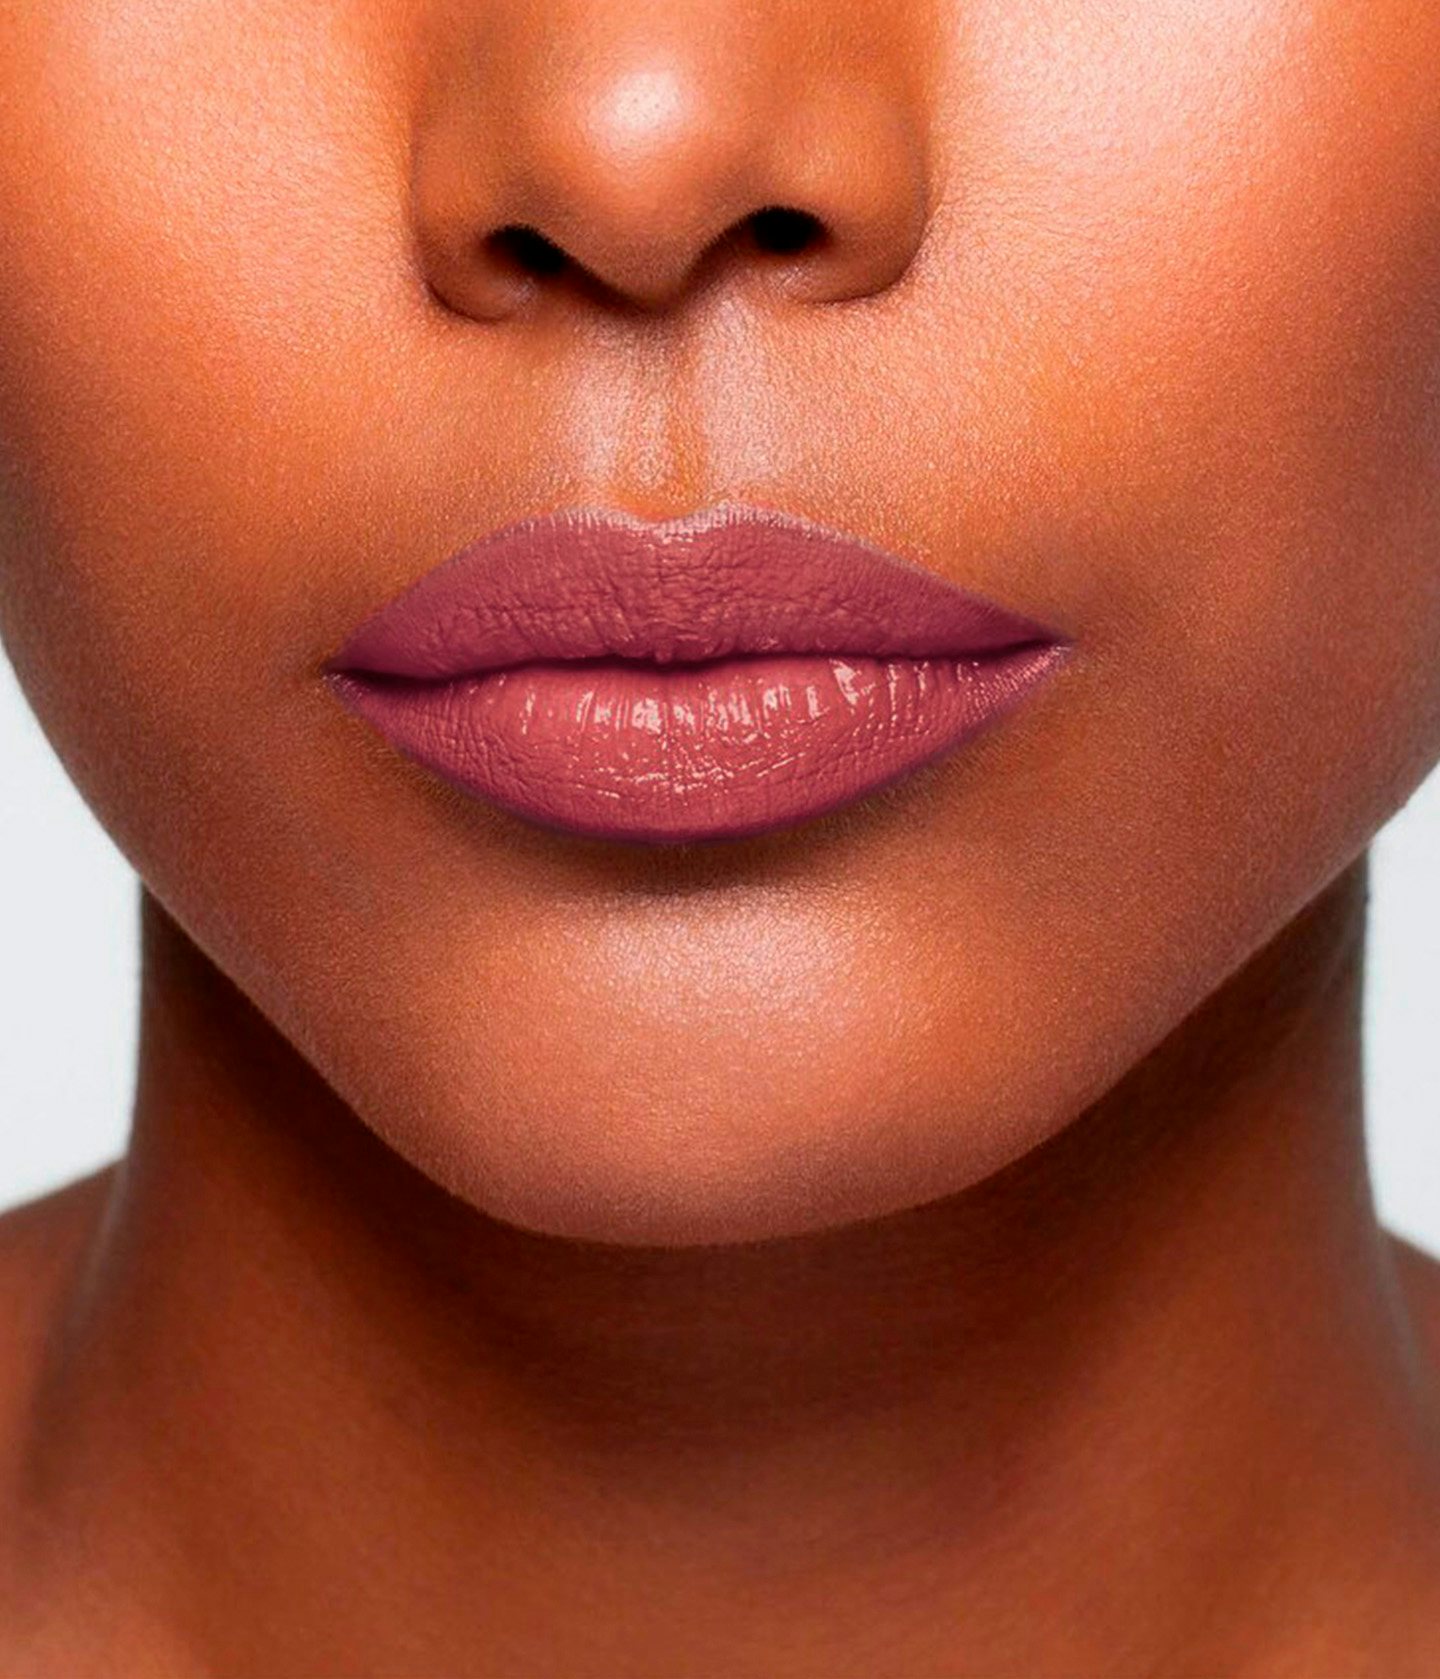 La bouche rouge Le Baume Kelly shade on the lips of a dark skin model